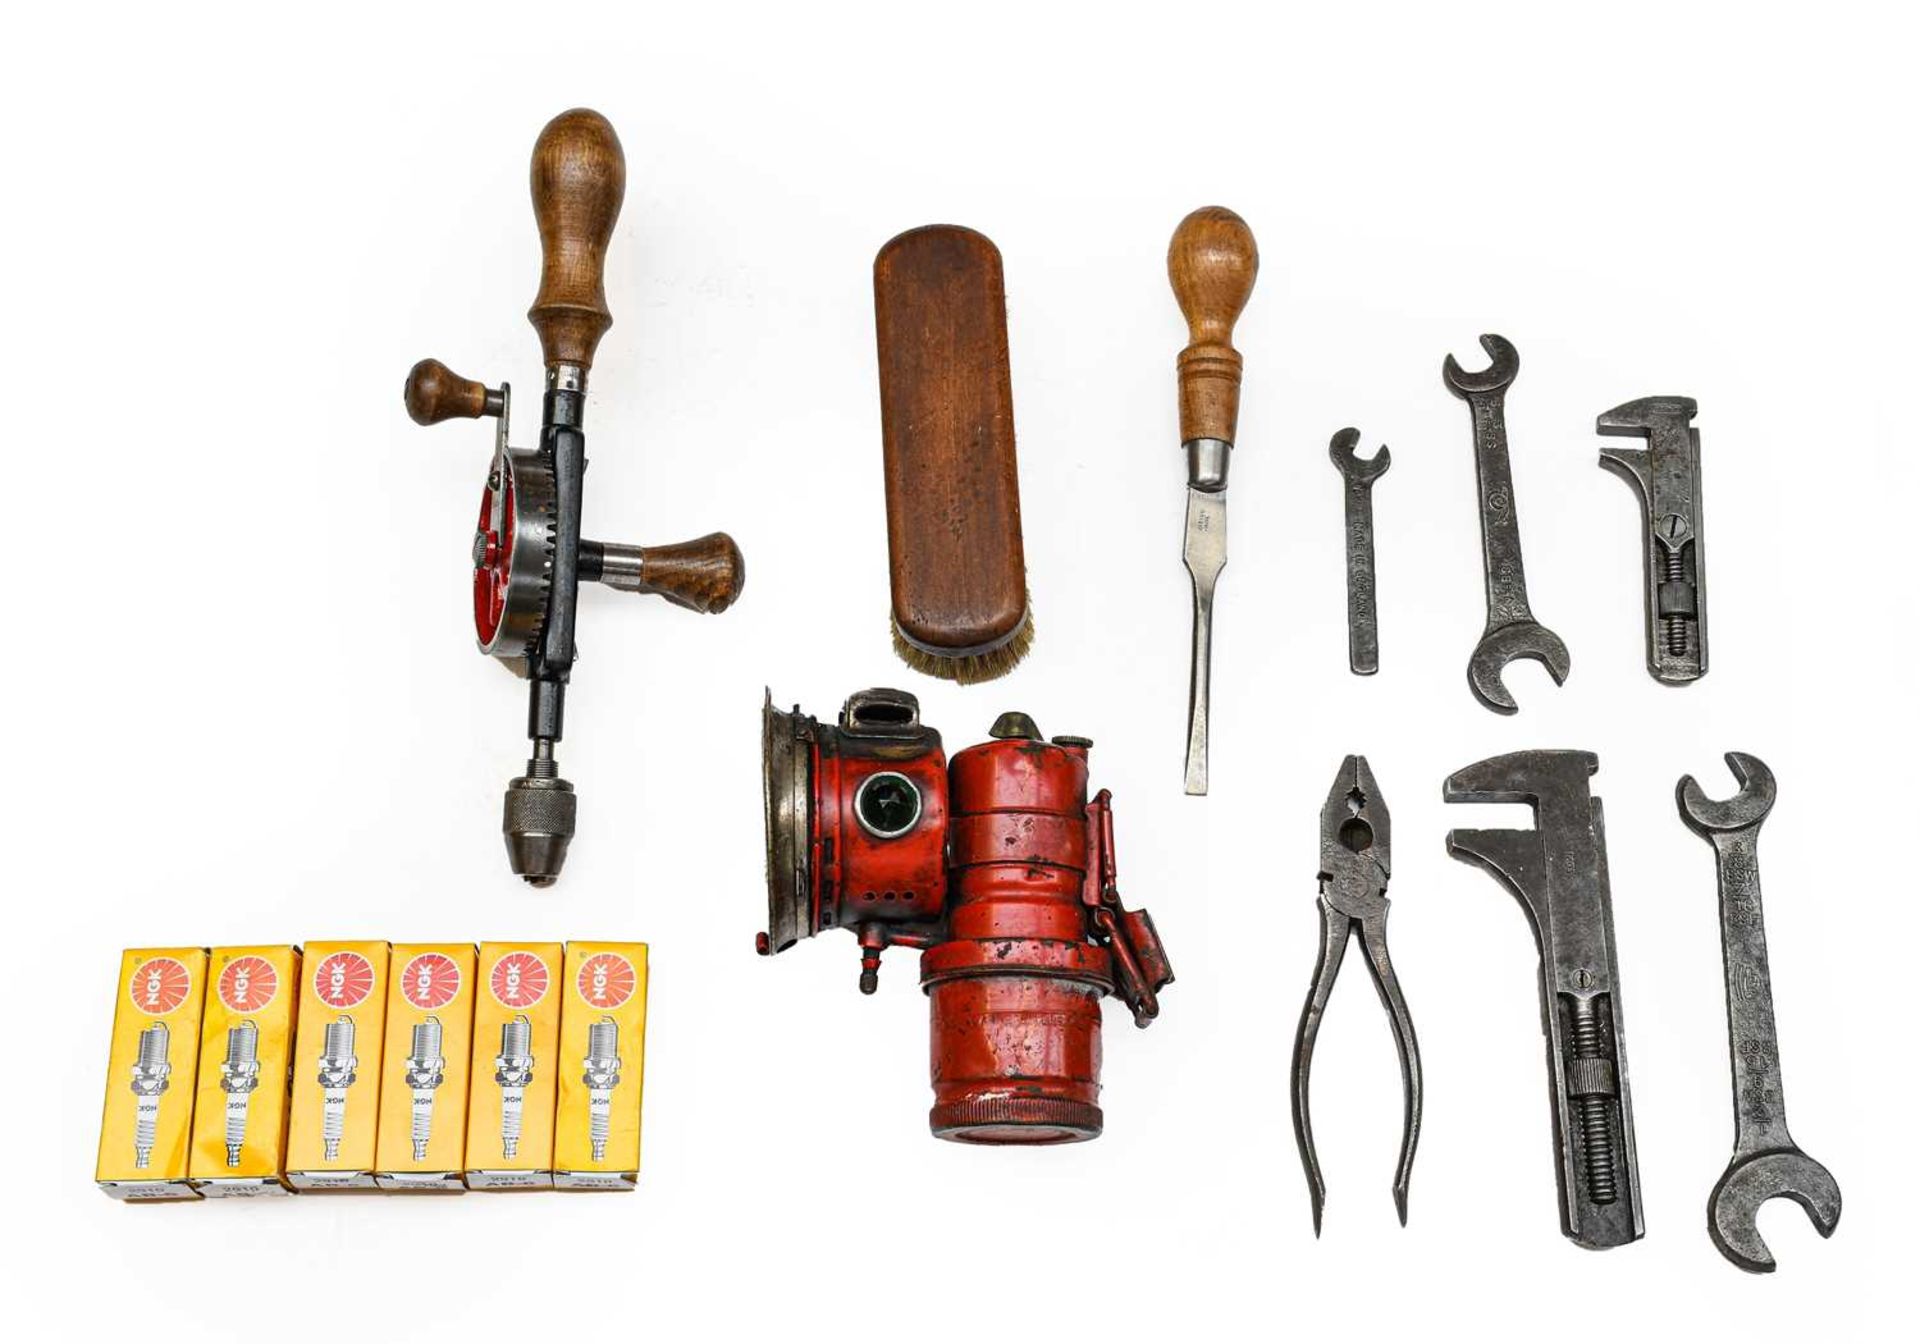 A Motor Mechanic’s Mechanical Hand Drill, with turned wooden handle; A Flat-Head Screwdriver; A No.